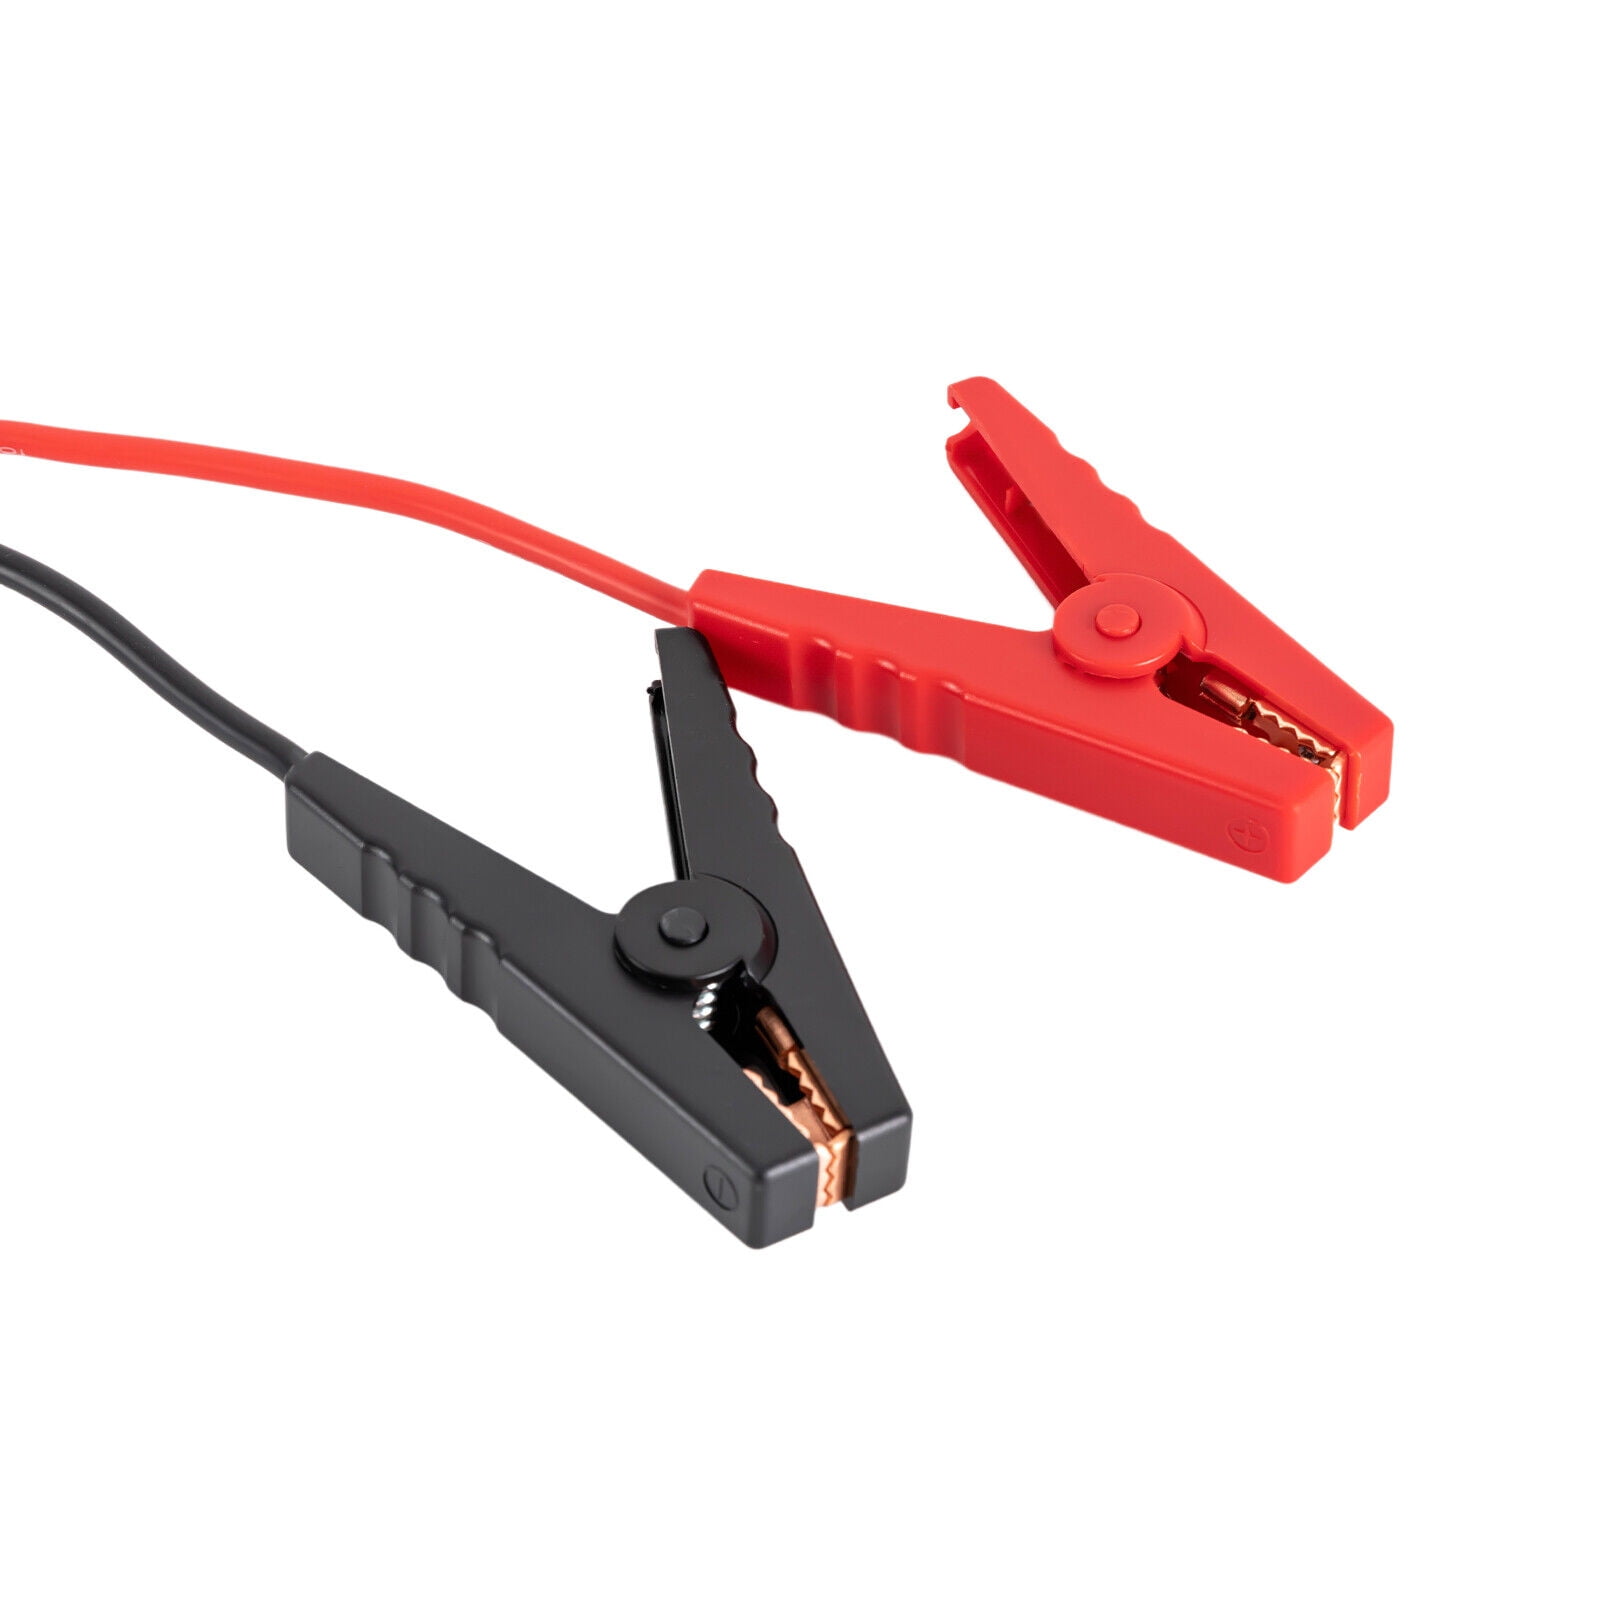 Portable Jump Starter Cable Connector, Jumper Cable EC5 Connector Alligator  Clamp Booster Battery for Car Jump Starters 12v 